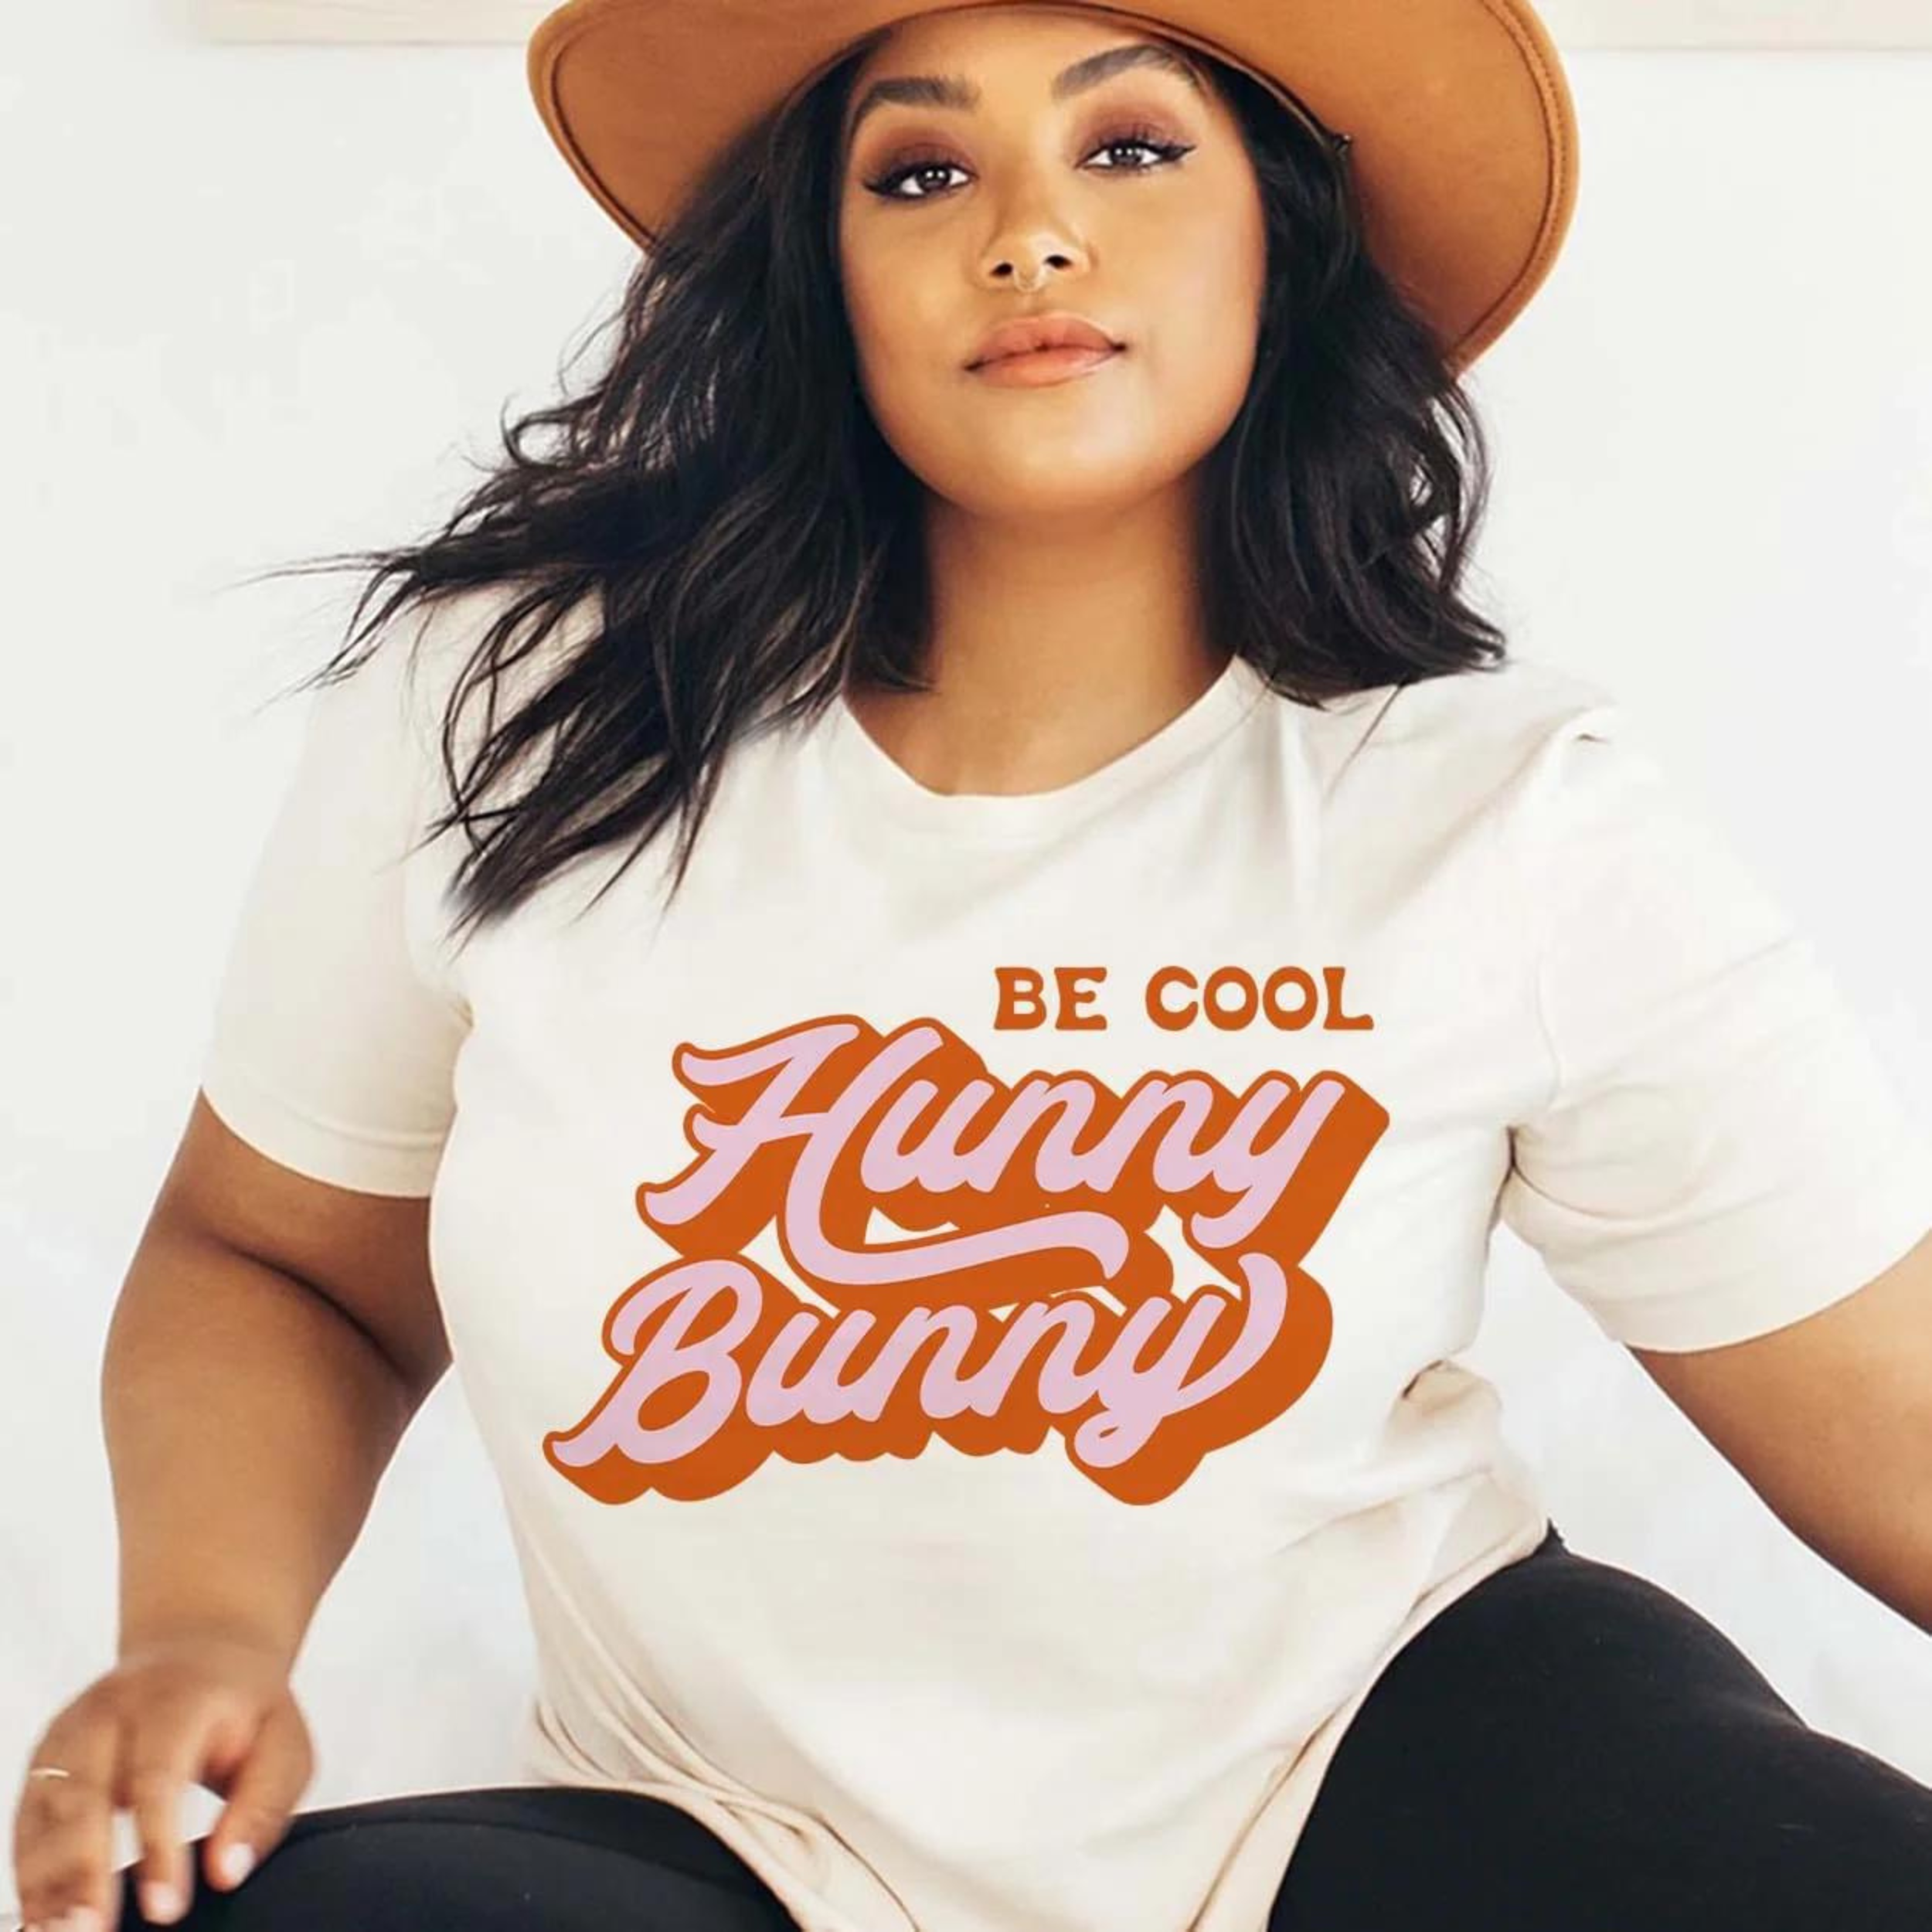 A cream colored short sleeve tee with the words "Be cool hunny bunny". Be cool is in a standard font in orange while the rest is pink with an orange shadow in cursive. Item is pictured on a plain white background.